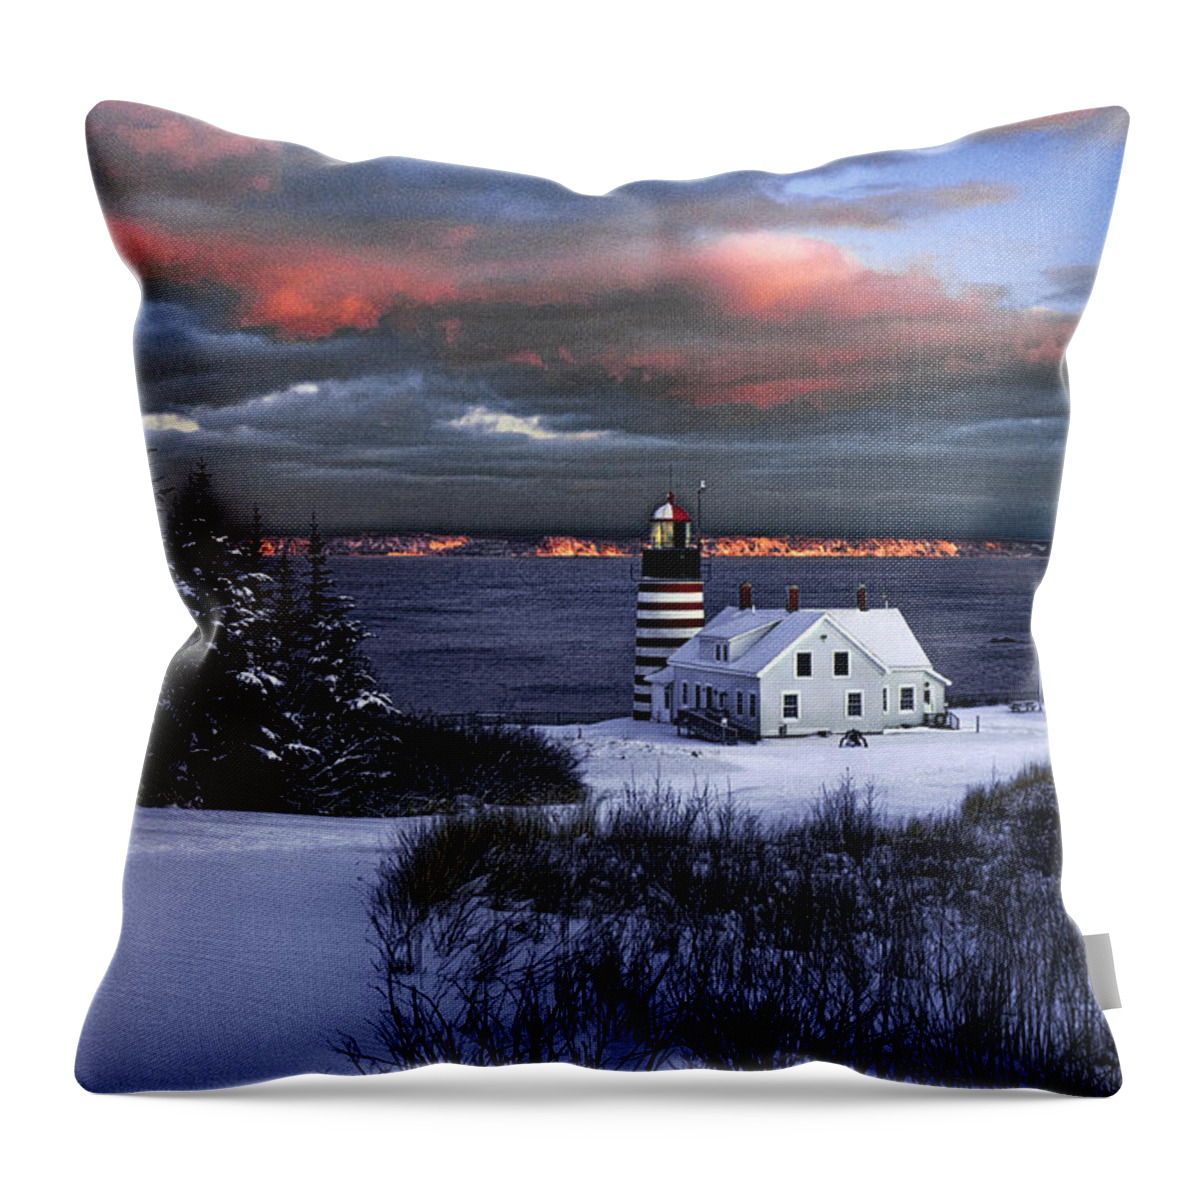 West Quoddy Head Lighthouse Throw Pillow featuring the photograph West Quoddy Head Lighthouse Winters Dusk Afterglow by Marty Saccone